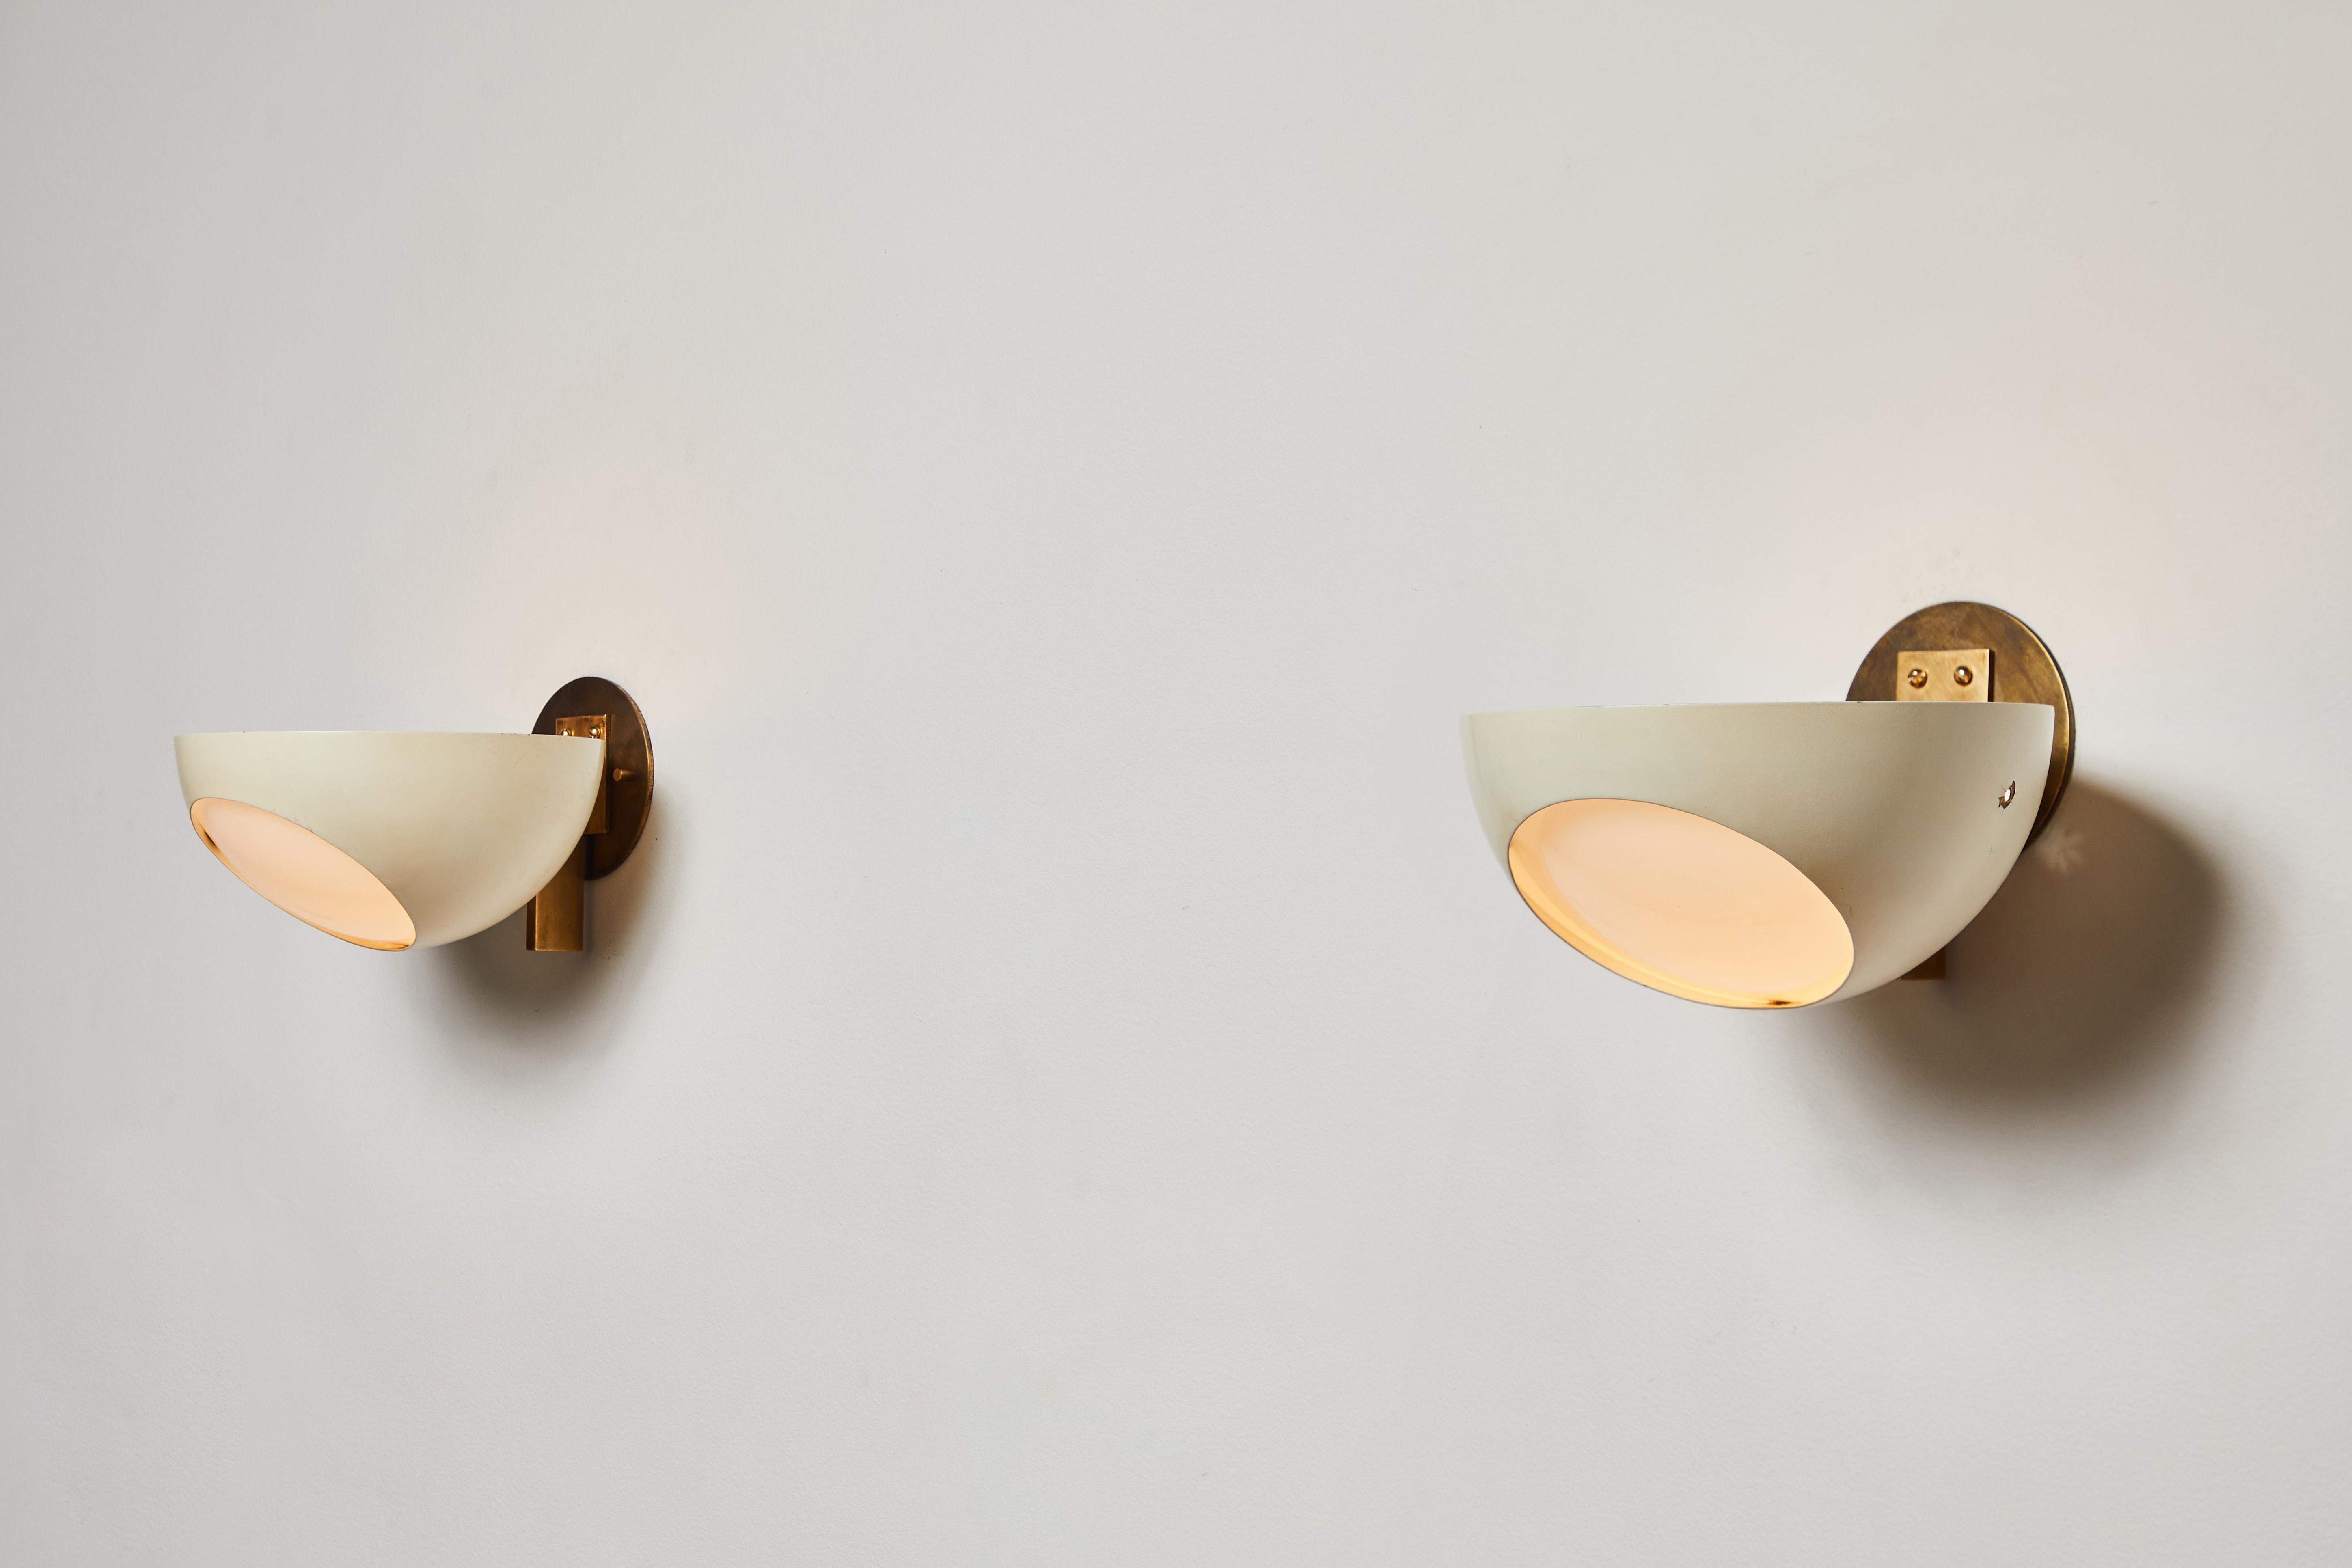 Italian Pair of Model 1963 Sconces by Max Ingrand for Fontana Arte